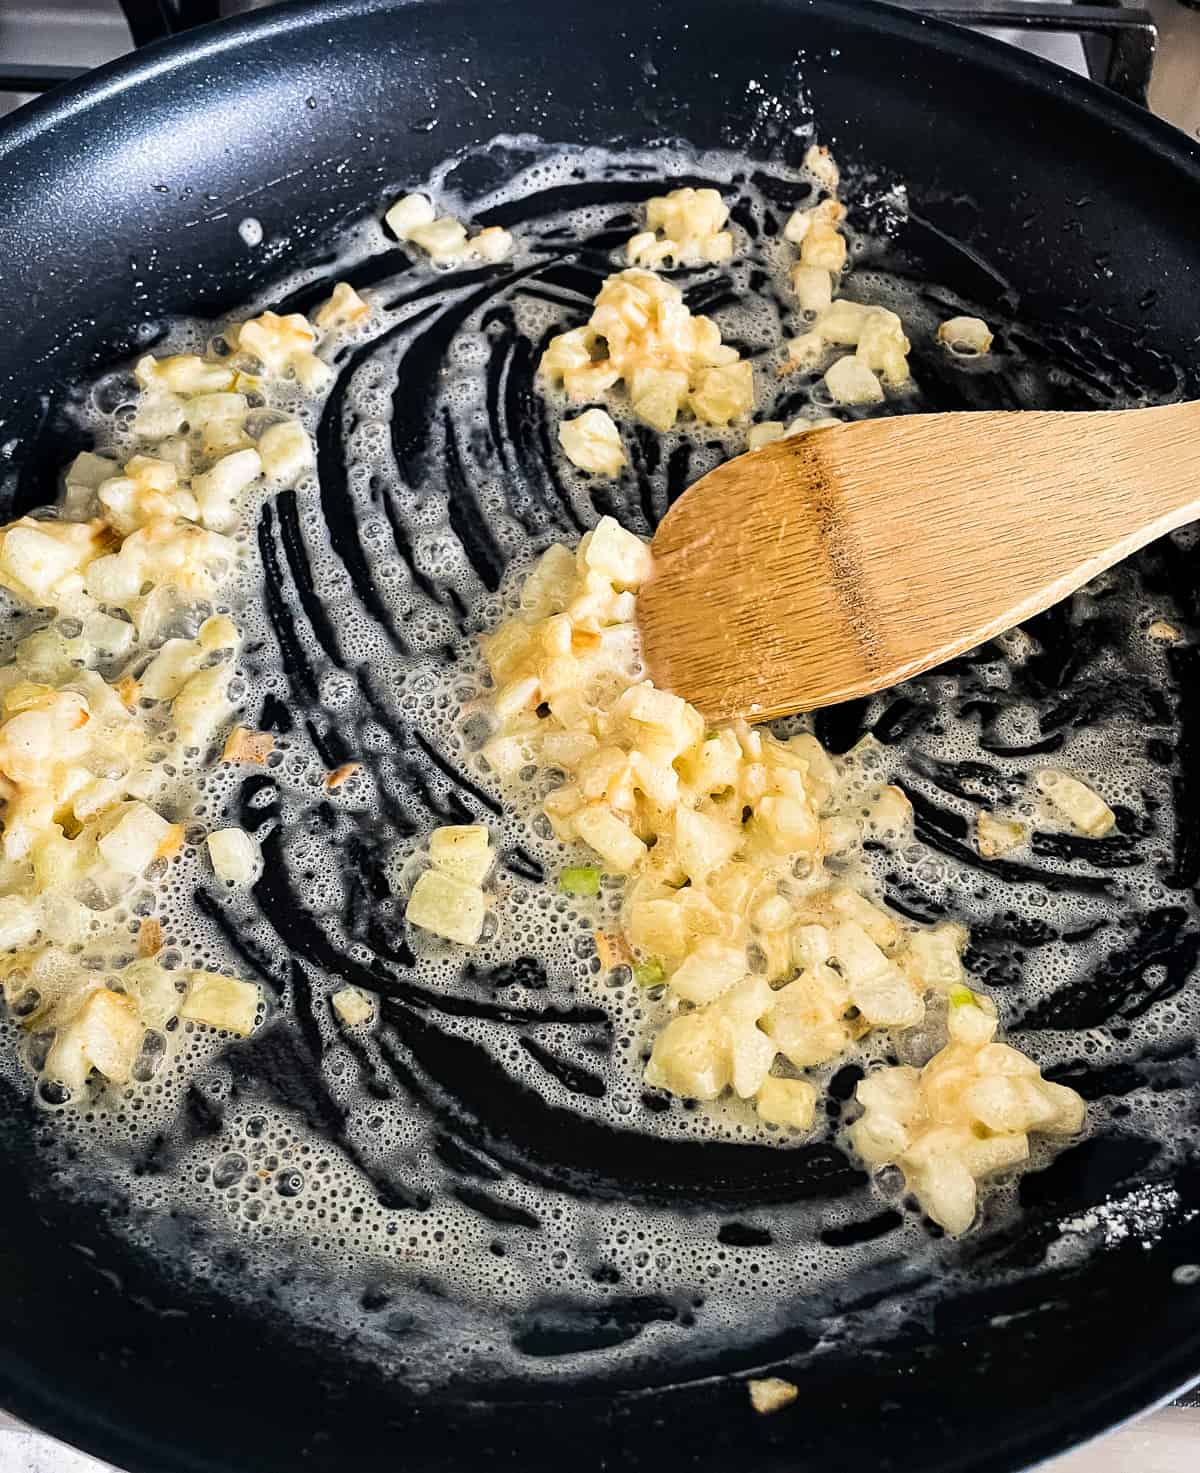 making a roux with butter, flour, and onions